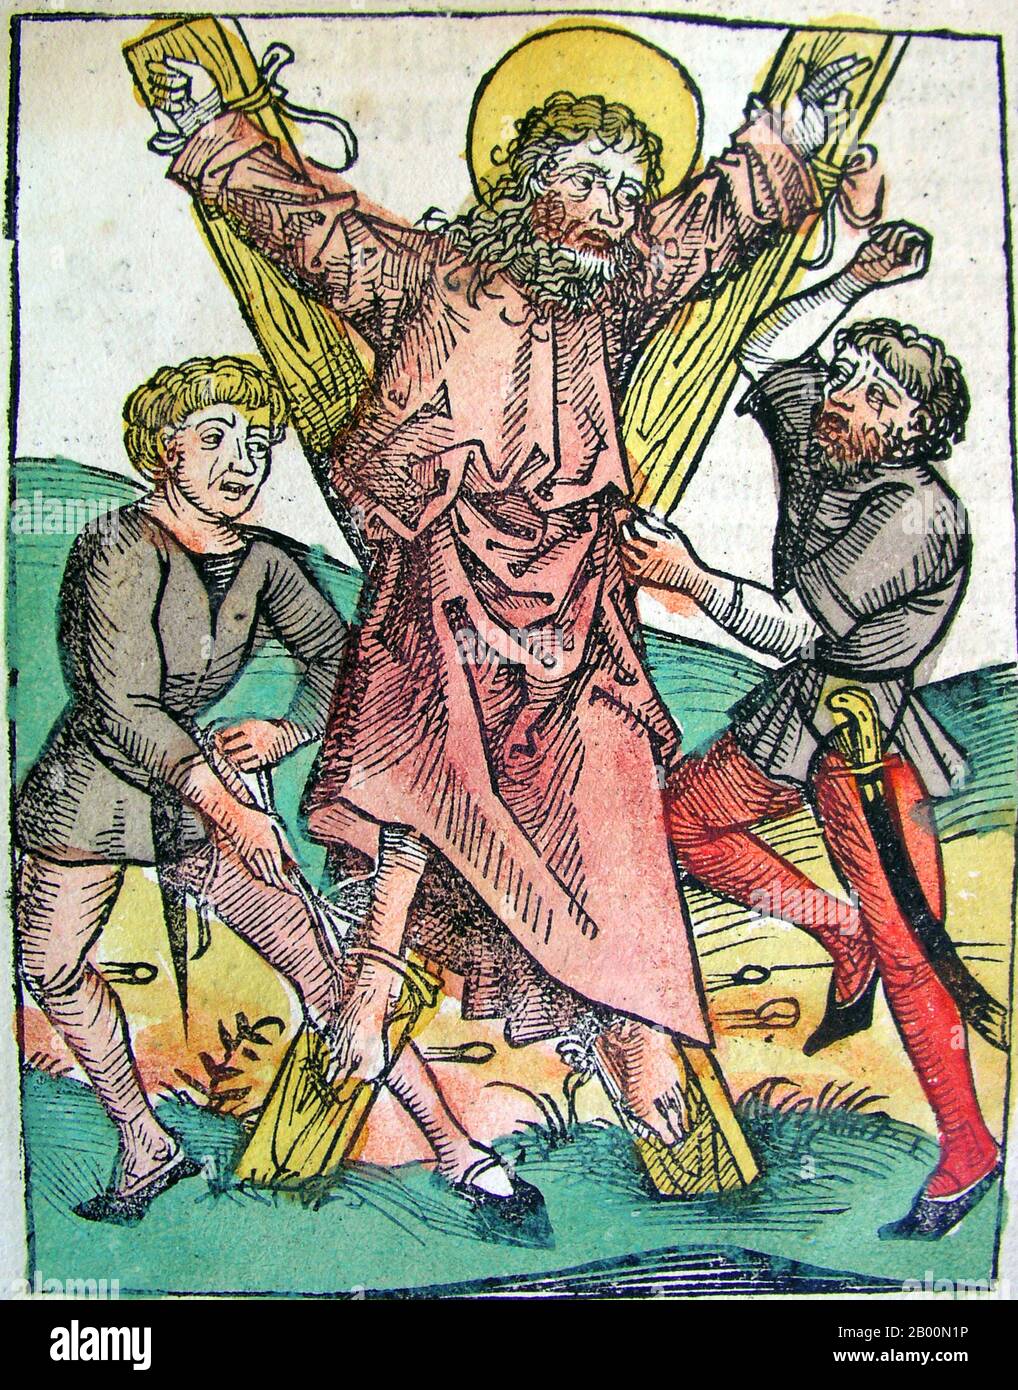 Germany: 'Andrew the Apostle'. The Nuremberg Chronicle, by Hartmann Schedel (1440-1514), 1493.  The Nuremberg Chronicle is an illustrated world history. Its structure follows the story of human history as related in the Bible, including the histories of a number of important Western cities. Written in Latin by Hartmann Schedel, with a version in German translation by Georg Alt, it appeared in 1493. It is one of the best-documented early printed books. It is classified as an incunabulum – that is, a book, pamphlet, or broadside that was printed (not handwritten) before the year 1501 in Europe. Stock Photo